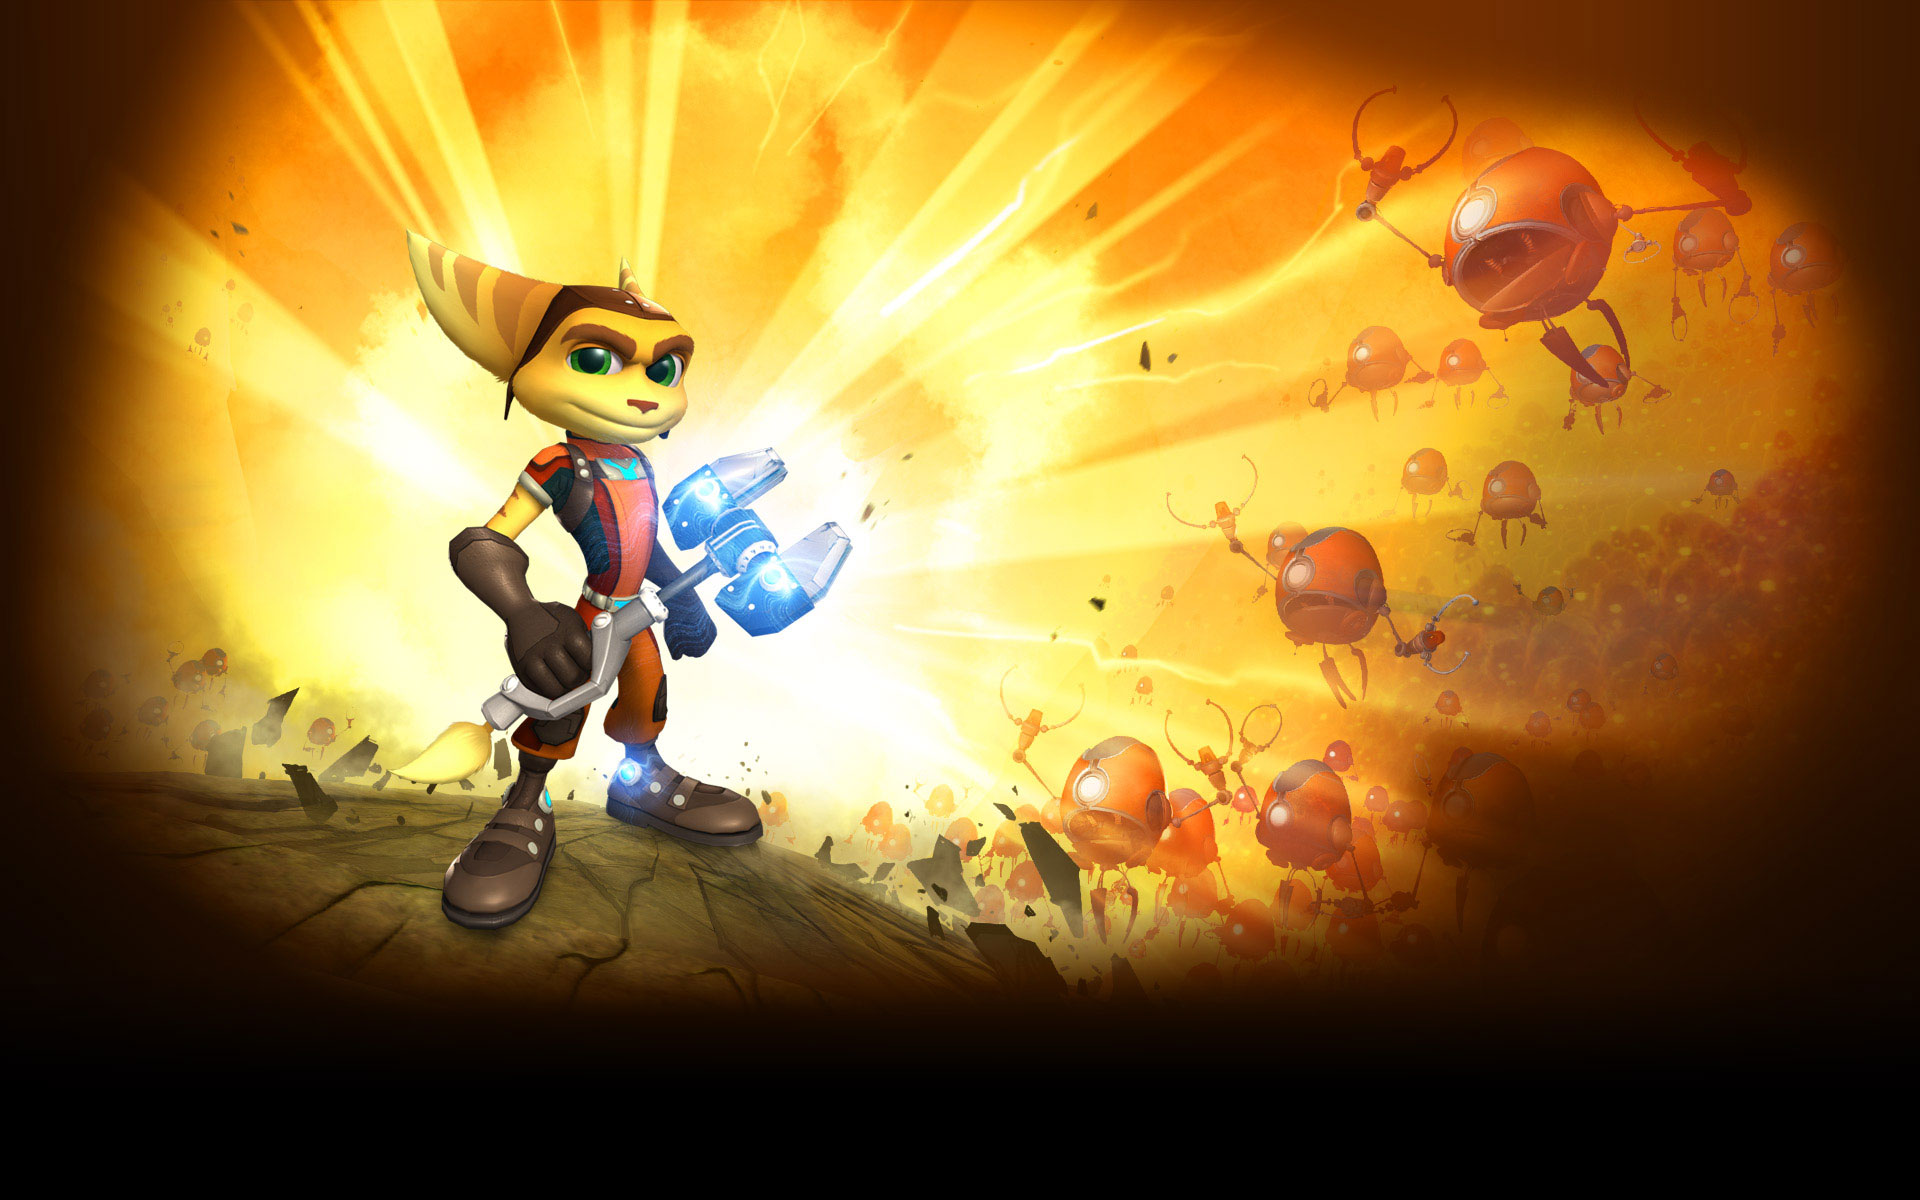 Ratchet and Clank wallpaper 1920x1200 5   hebusorg   High